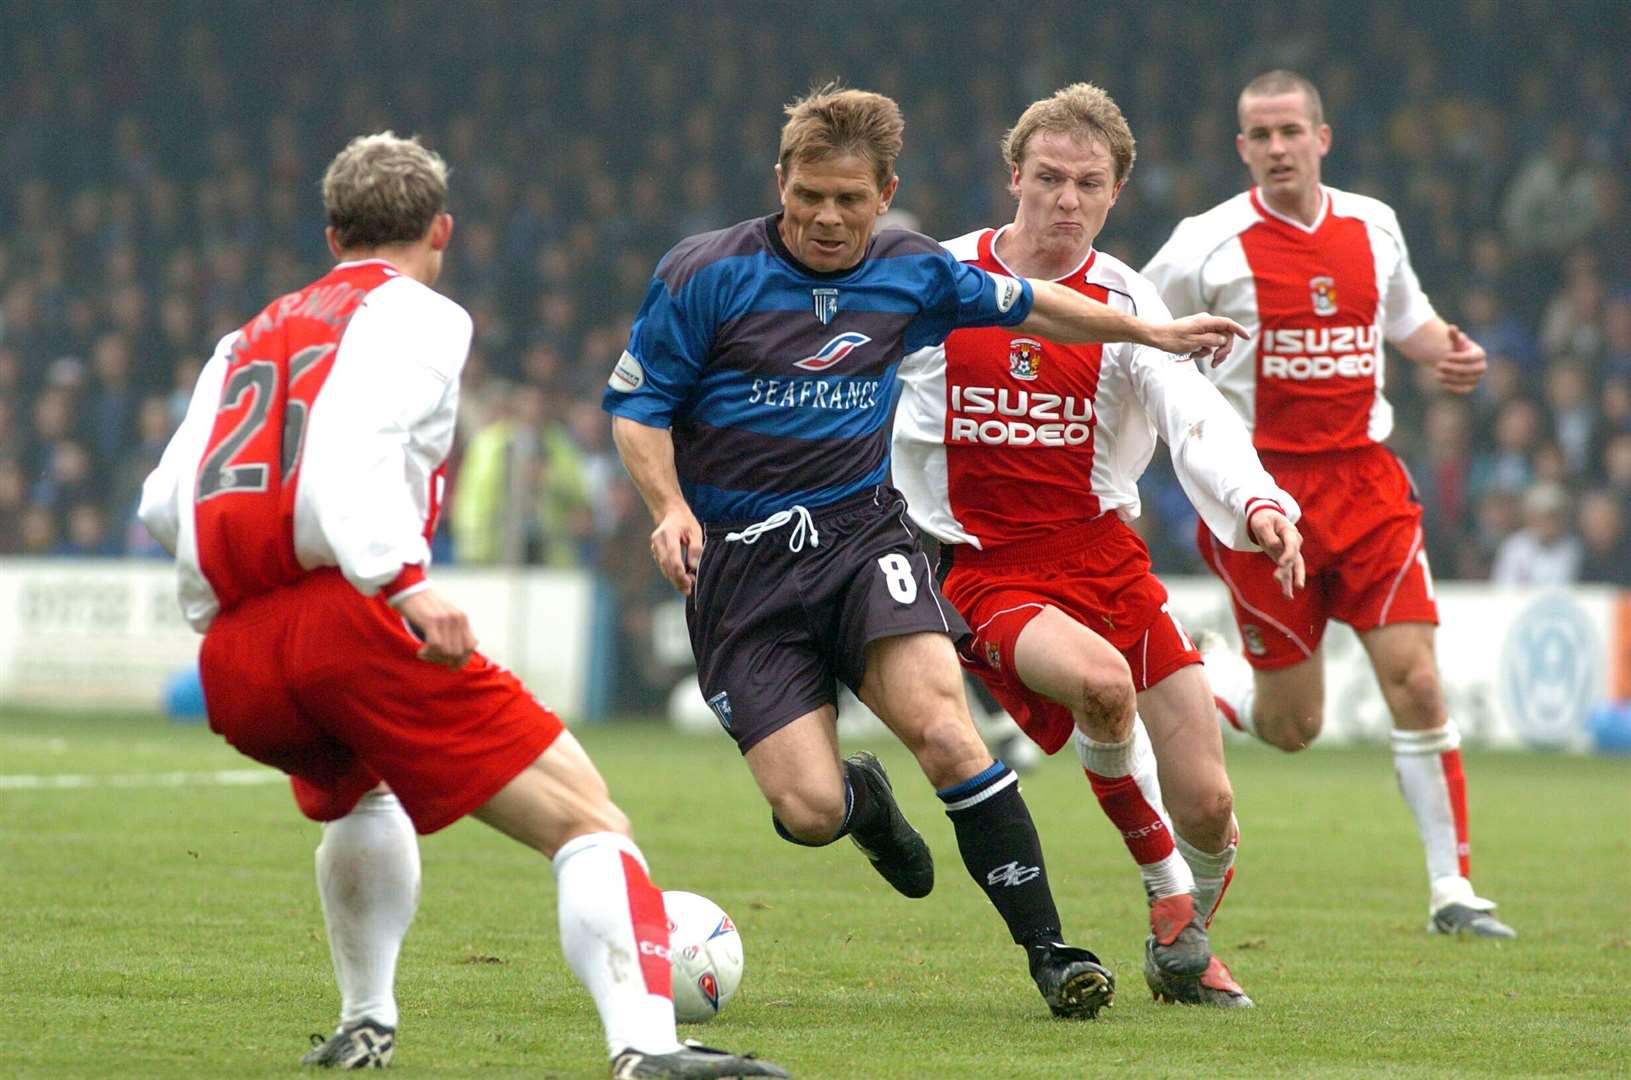 Andy Hessenthaler - made 362 appearances for Gillingham between 1996 and 2006